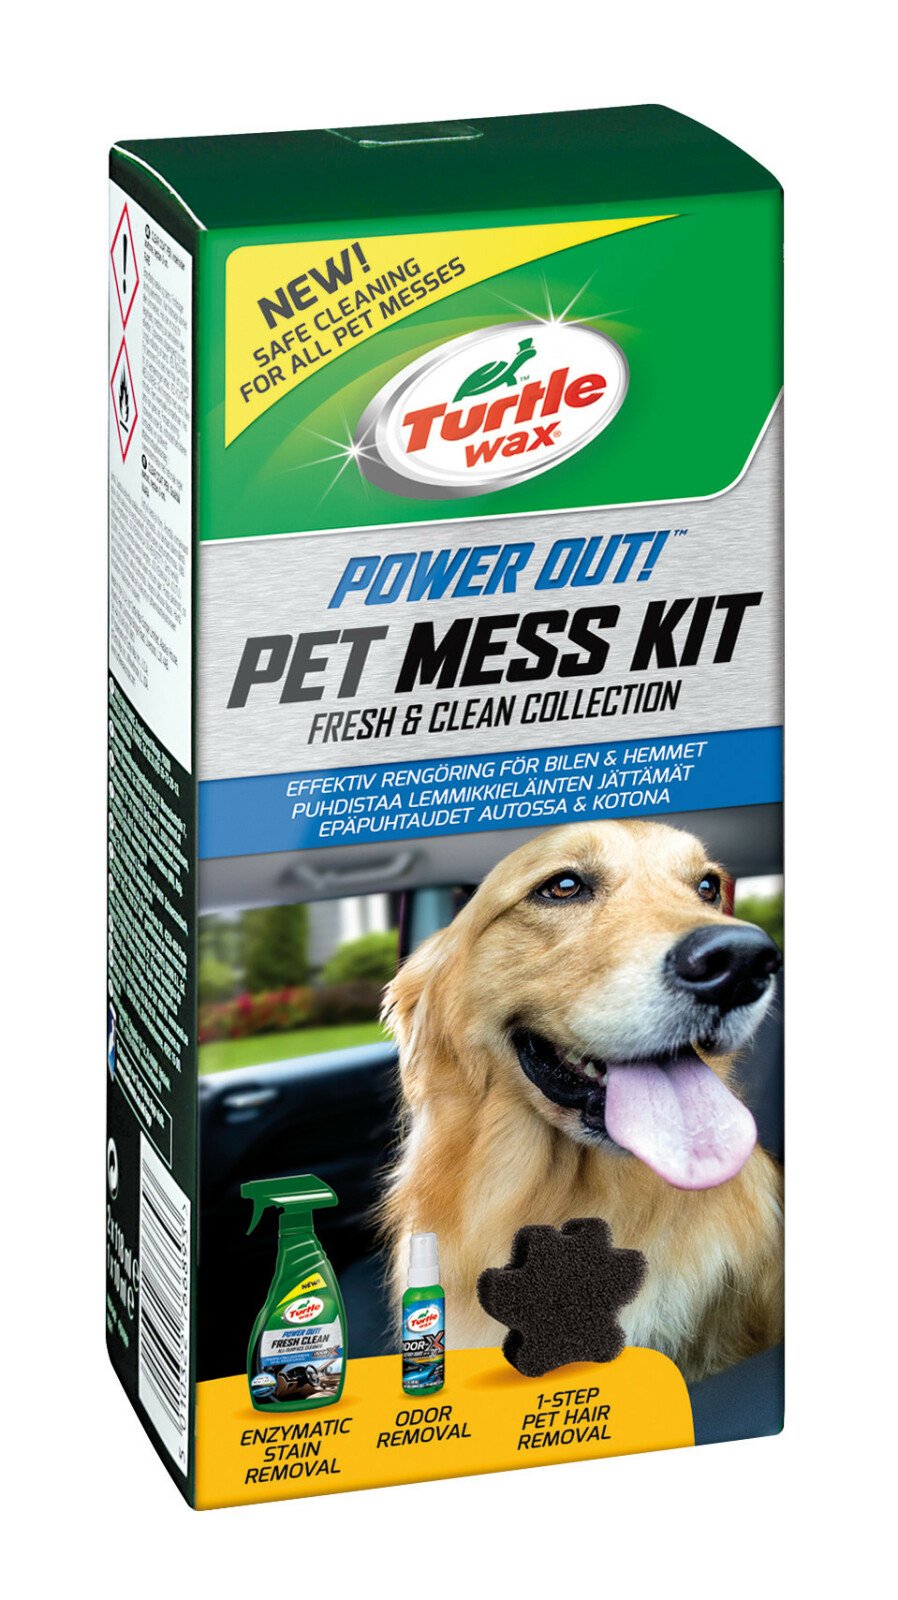 Pet mess kit stain & odor solutions - 500+59 ml thumb